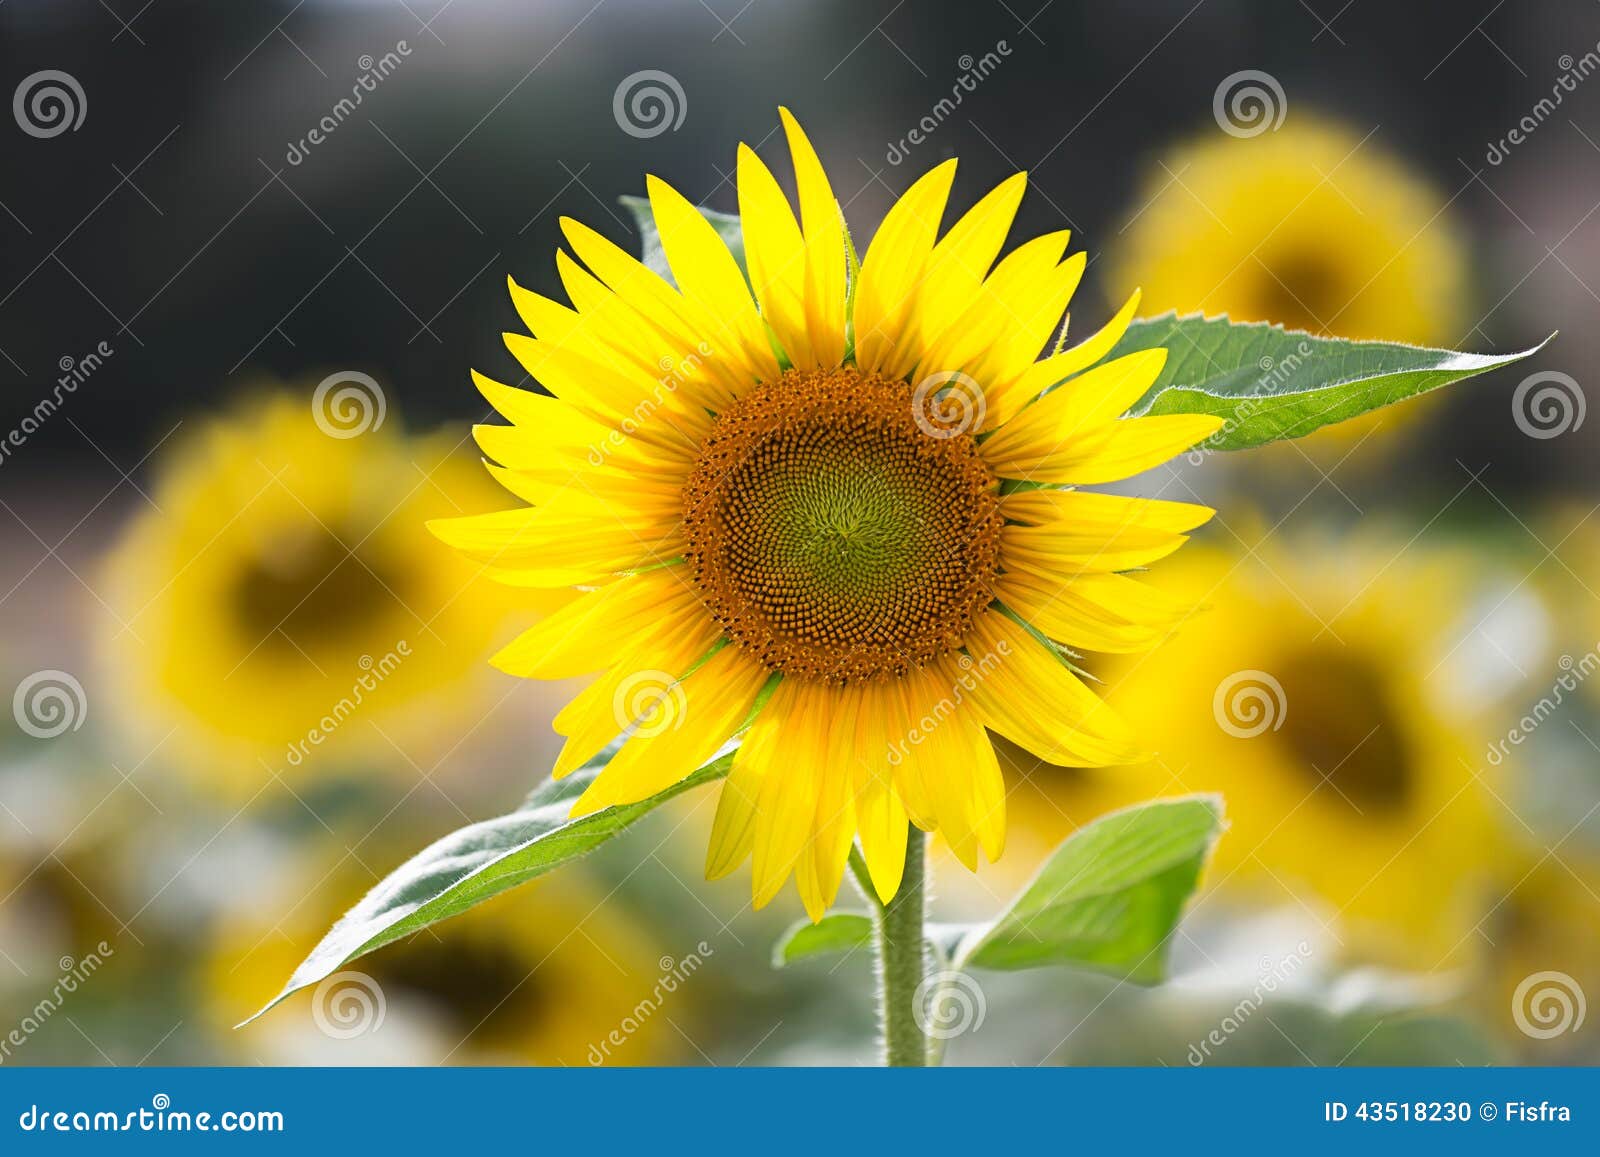 sunflower (lat. helianthus) at summertime, germany